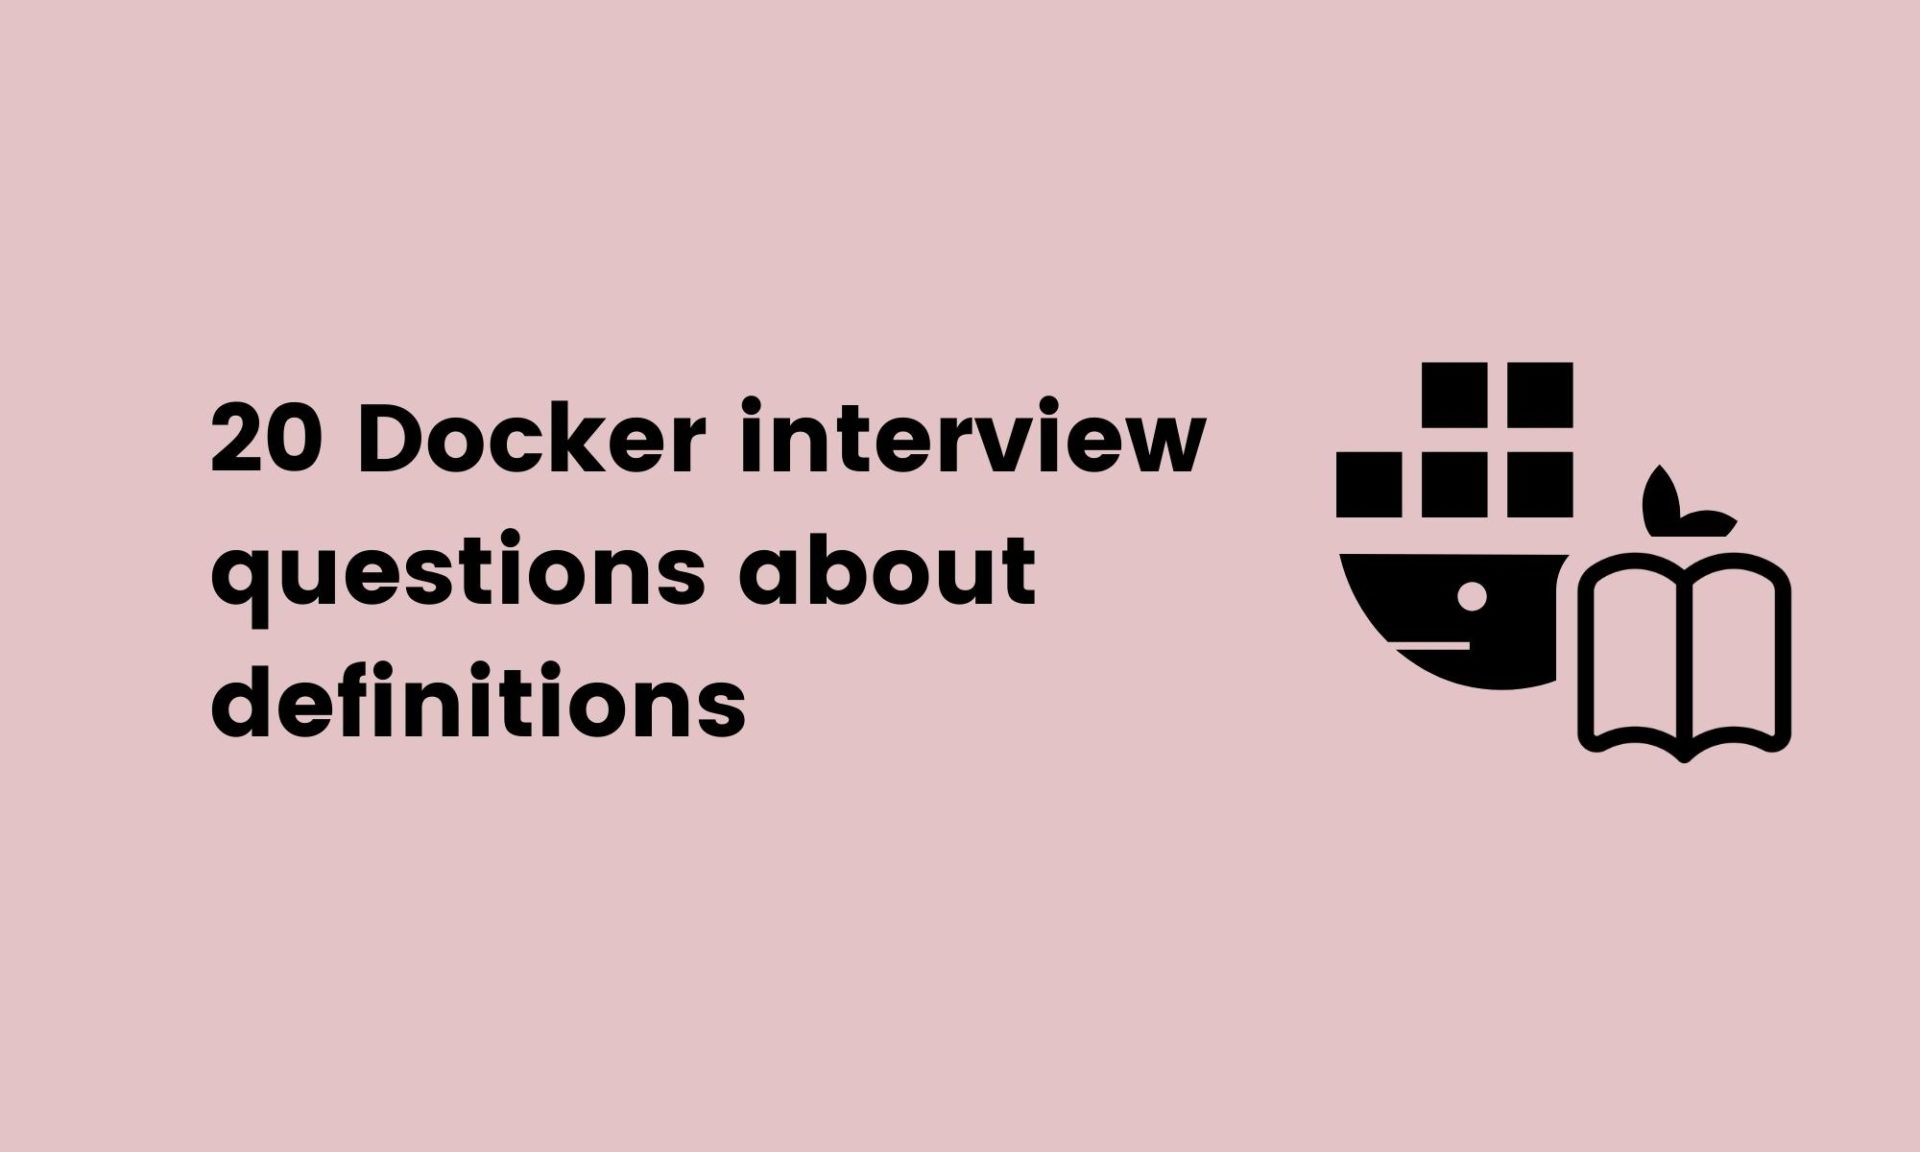 Docker interview questions about definitions